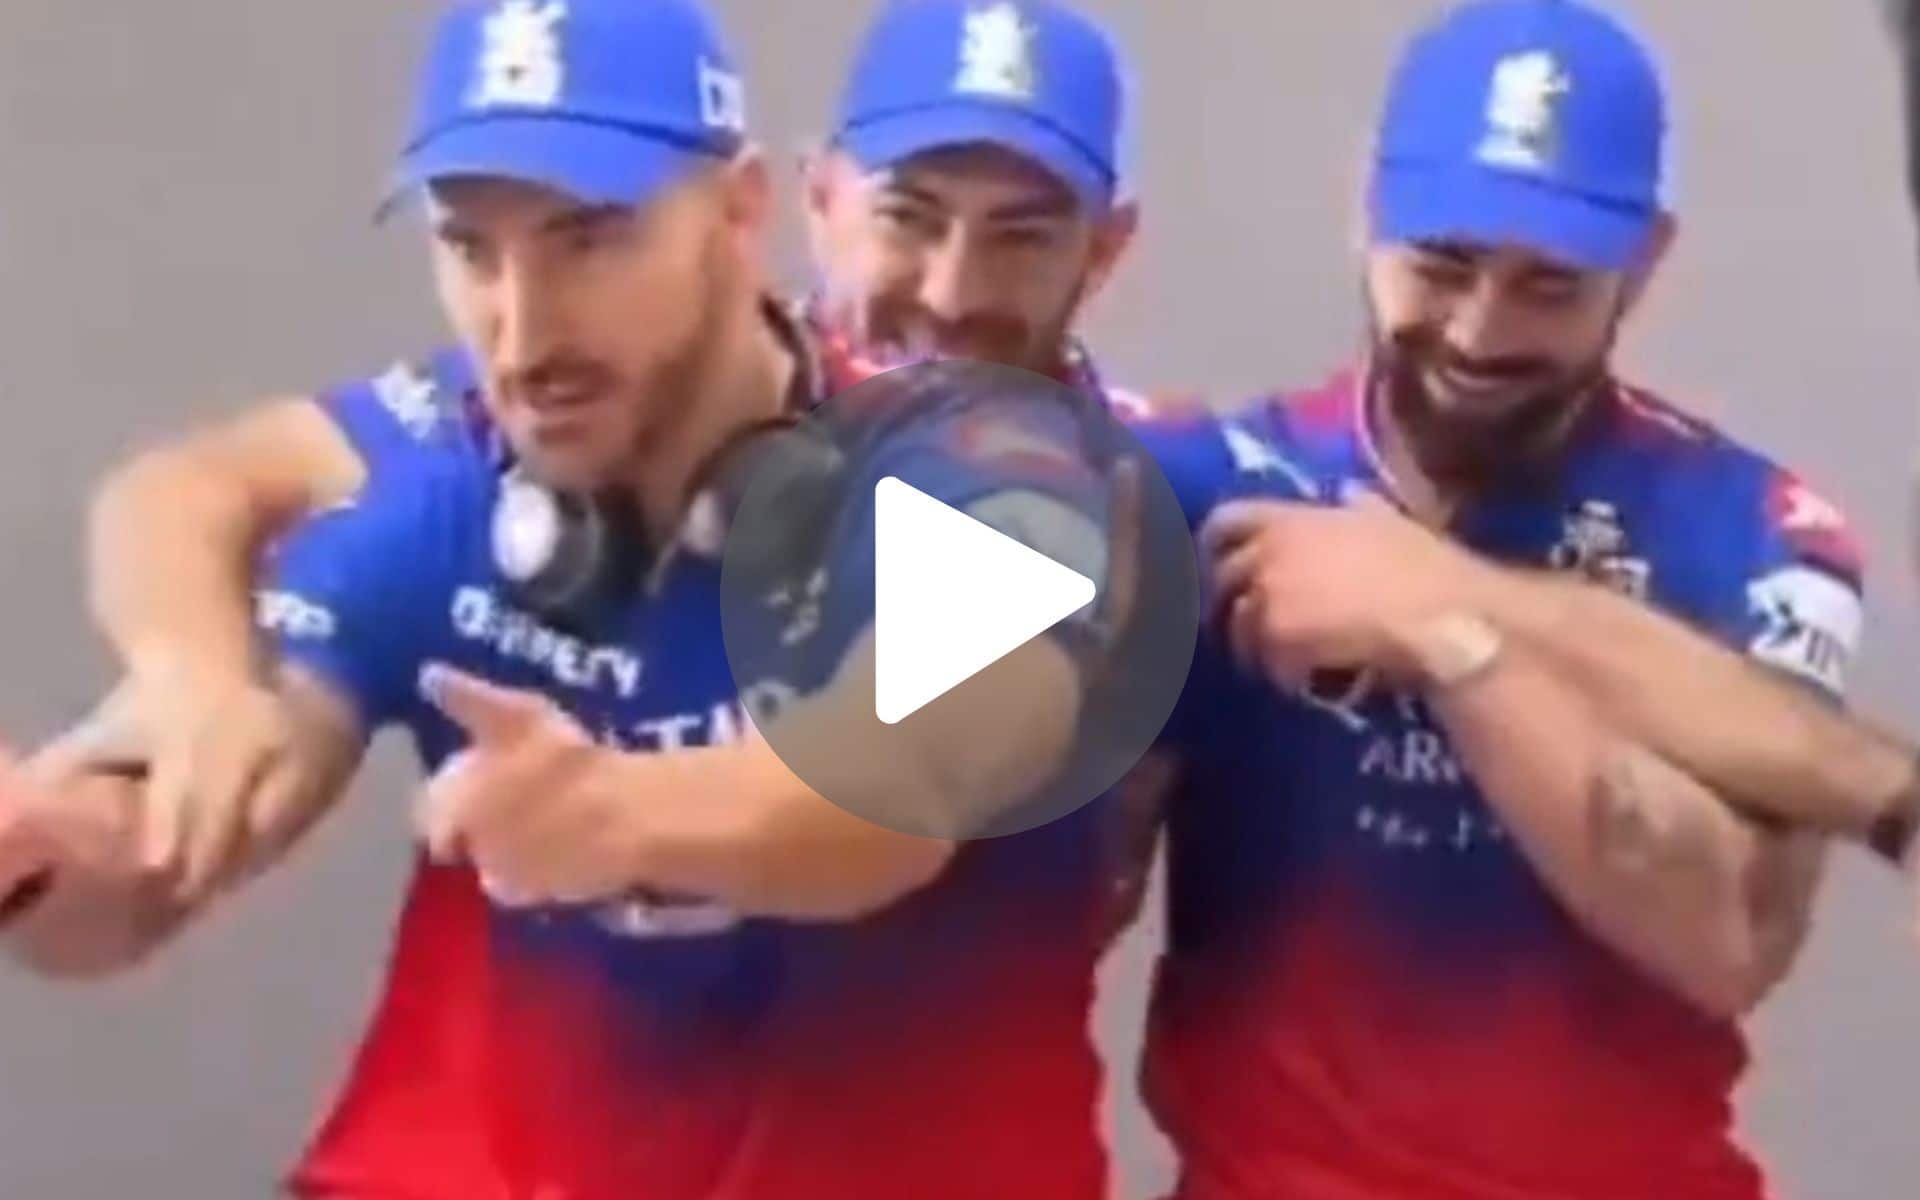 [Watch] Kohli, Maxwell, Du Plessis Become WWE Wresters During RCB's Promotional Shoot